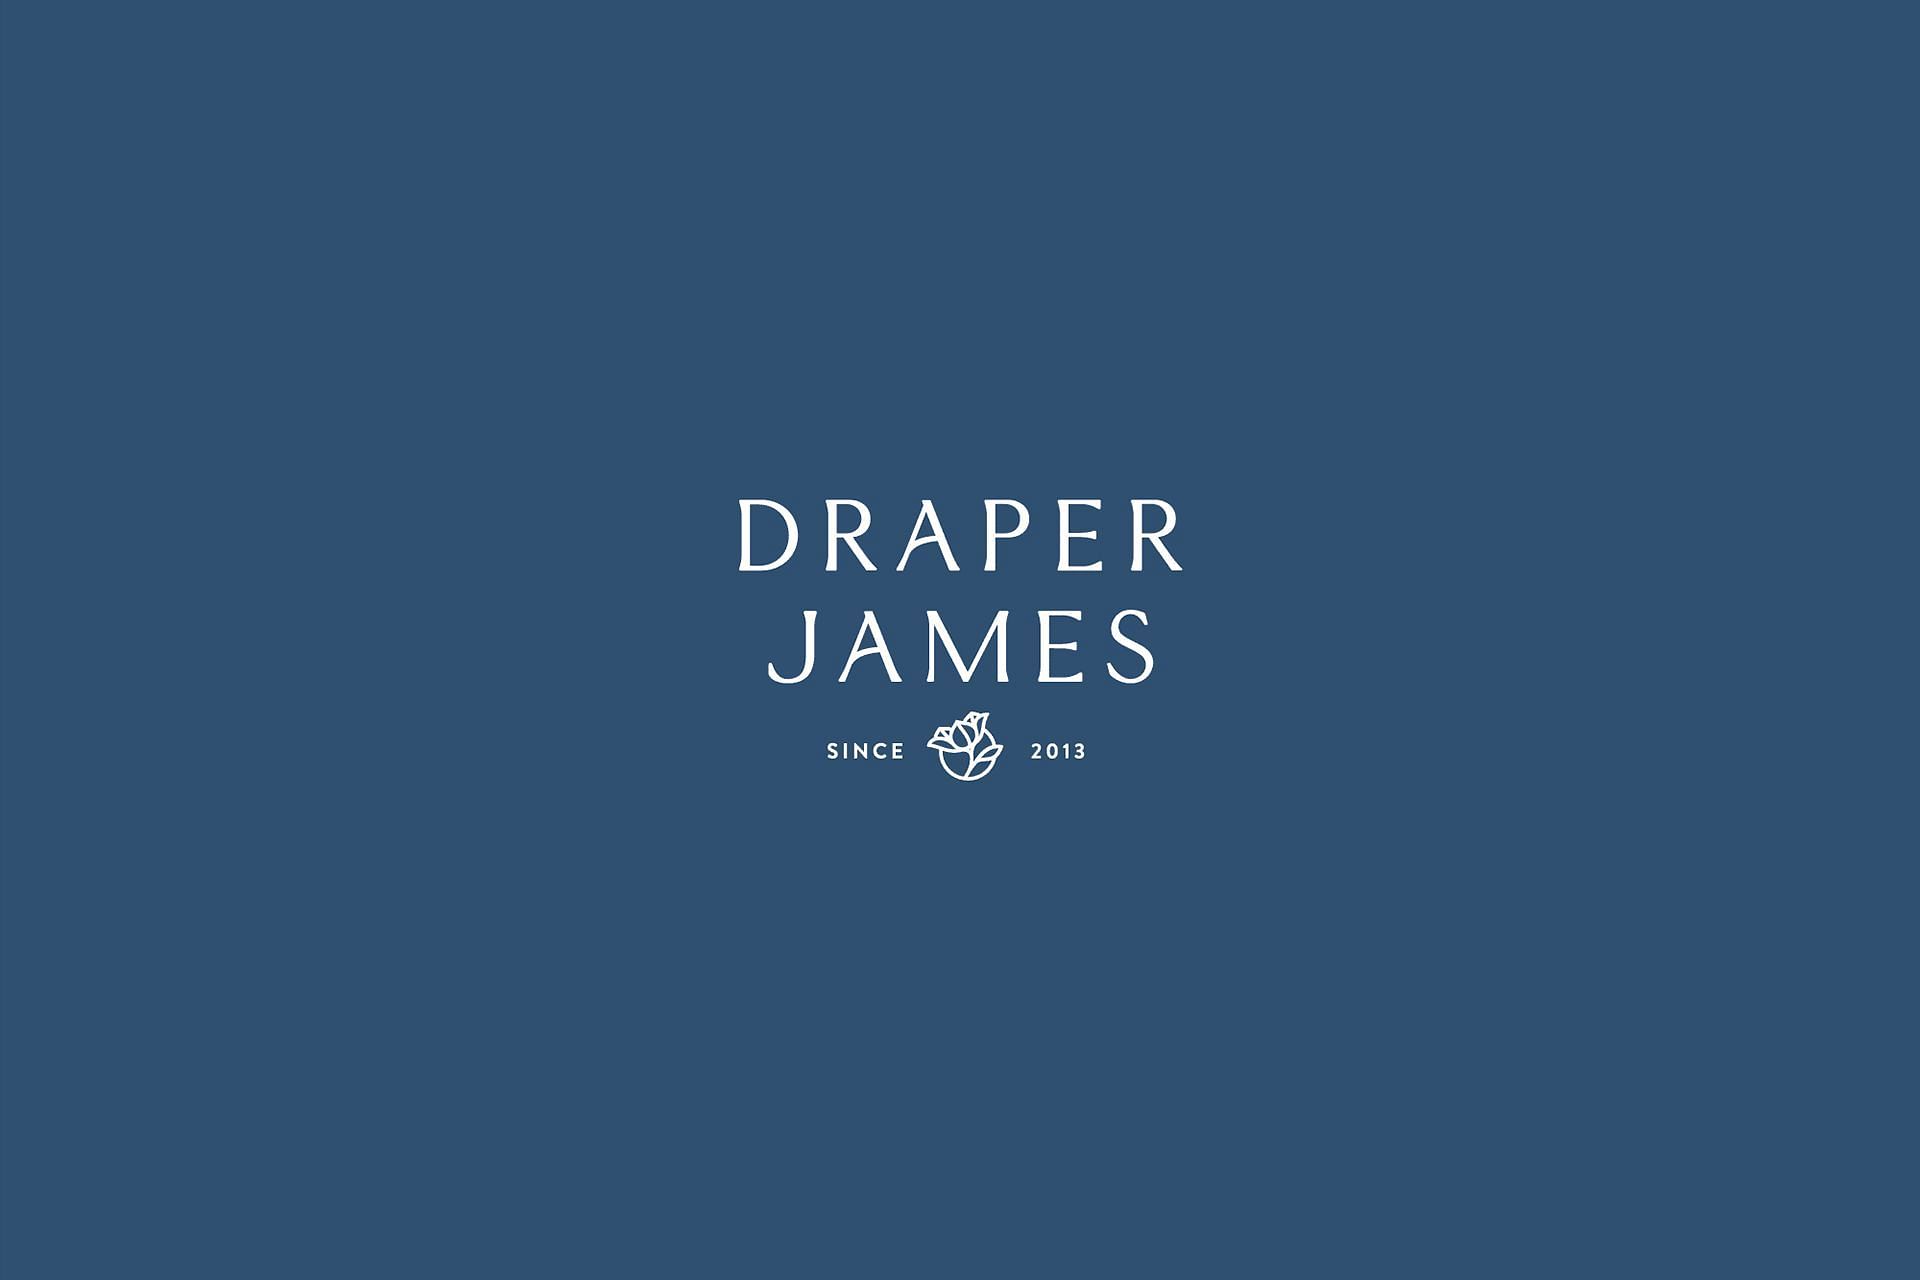 Draper James, the clothing and accessories brand